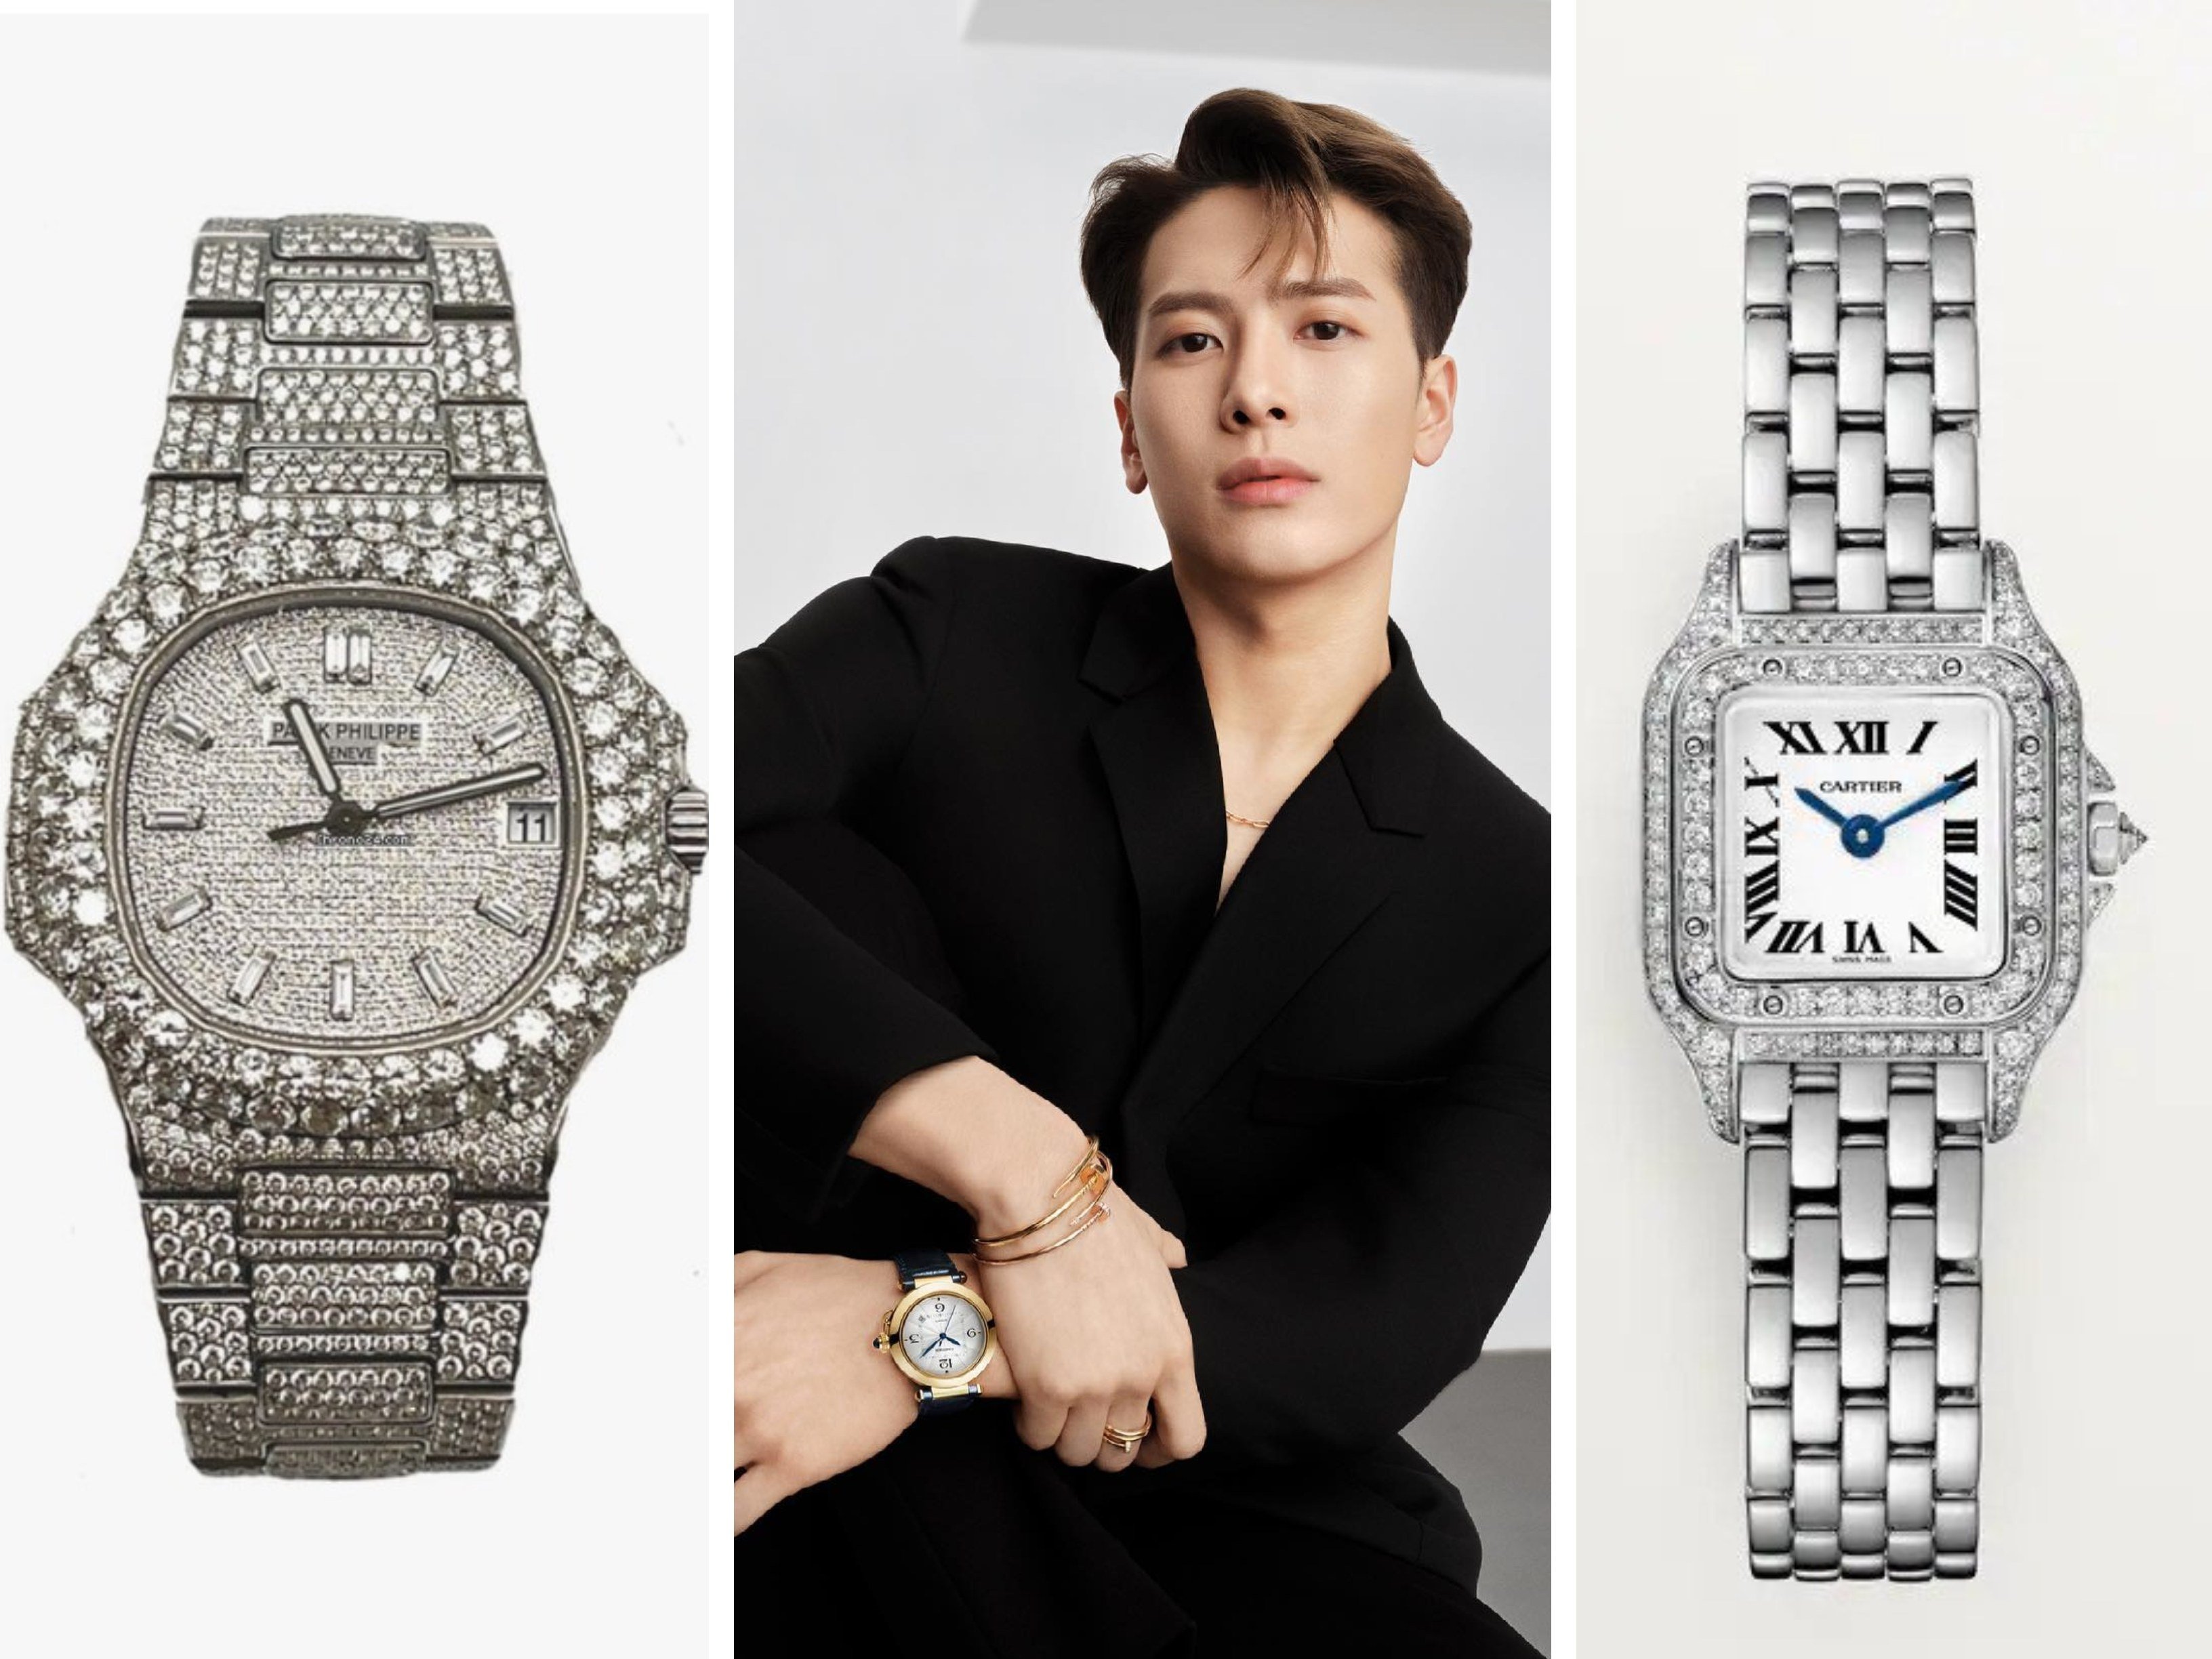 Jackson Wang boasts an enviable watch collection, including pieces by Patek Philippe and Cartier. Photos: Chrono24, Cartier, @jacksonwang852g7/Instagram